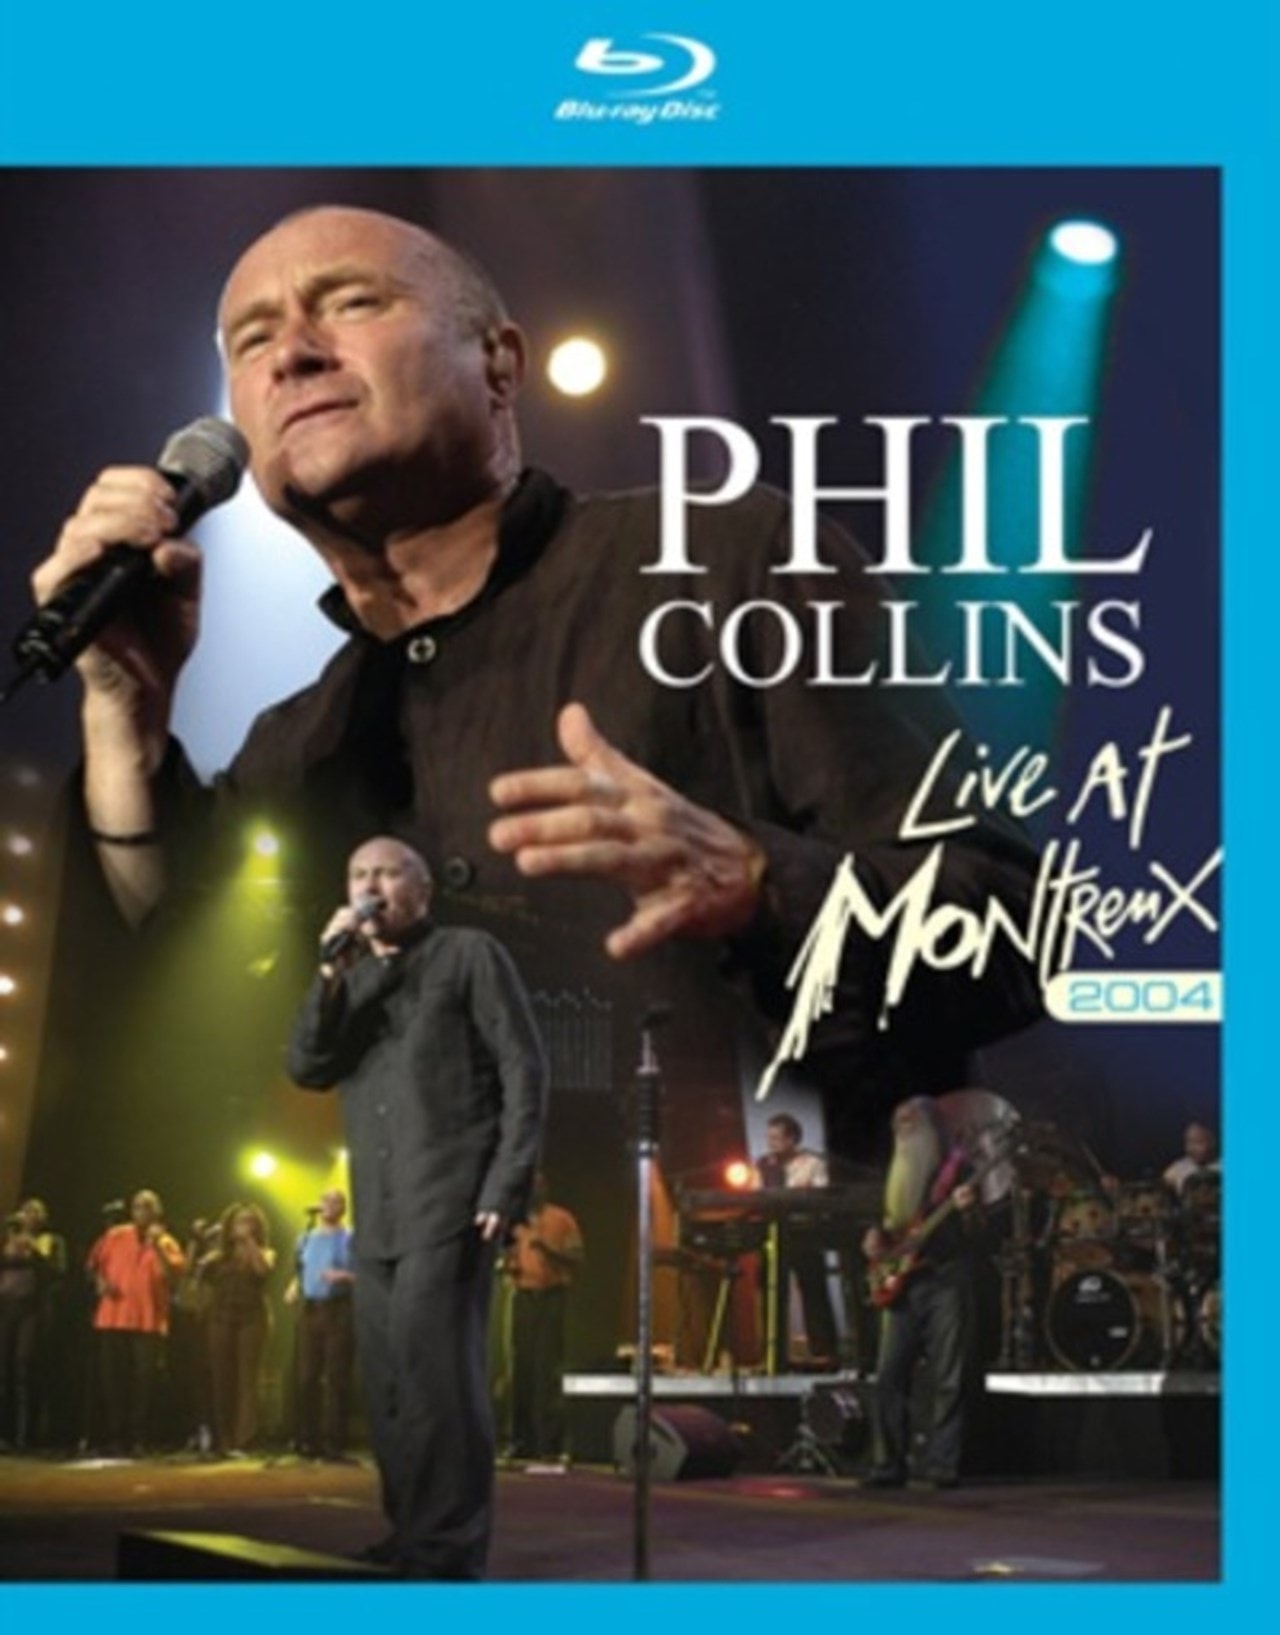 Phil Collins Live at Montreux 2004 Bluray Free shipping over £20